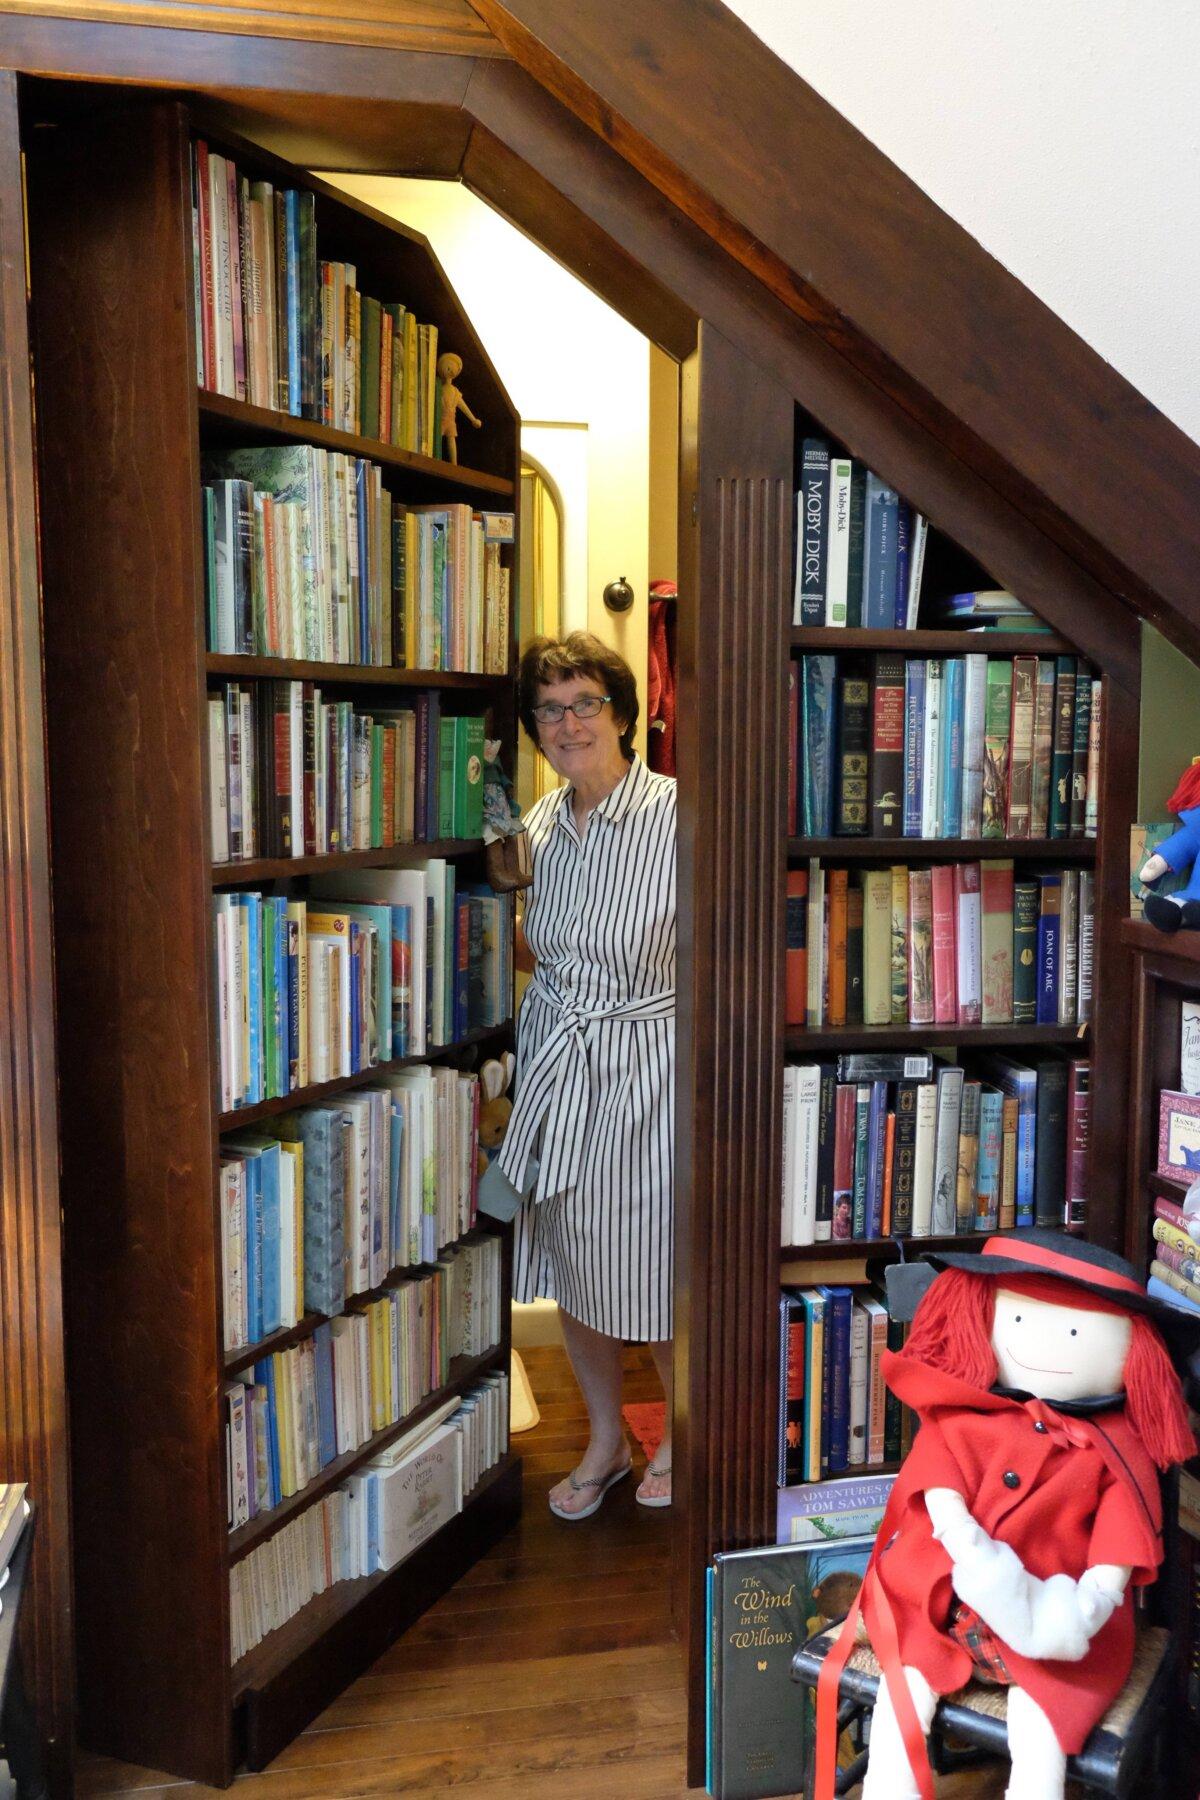 Mrs. Anderson demonstrates the swinging bookcase door in her library’s loft. (Annie Holmquist)